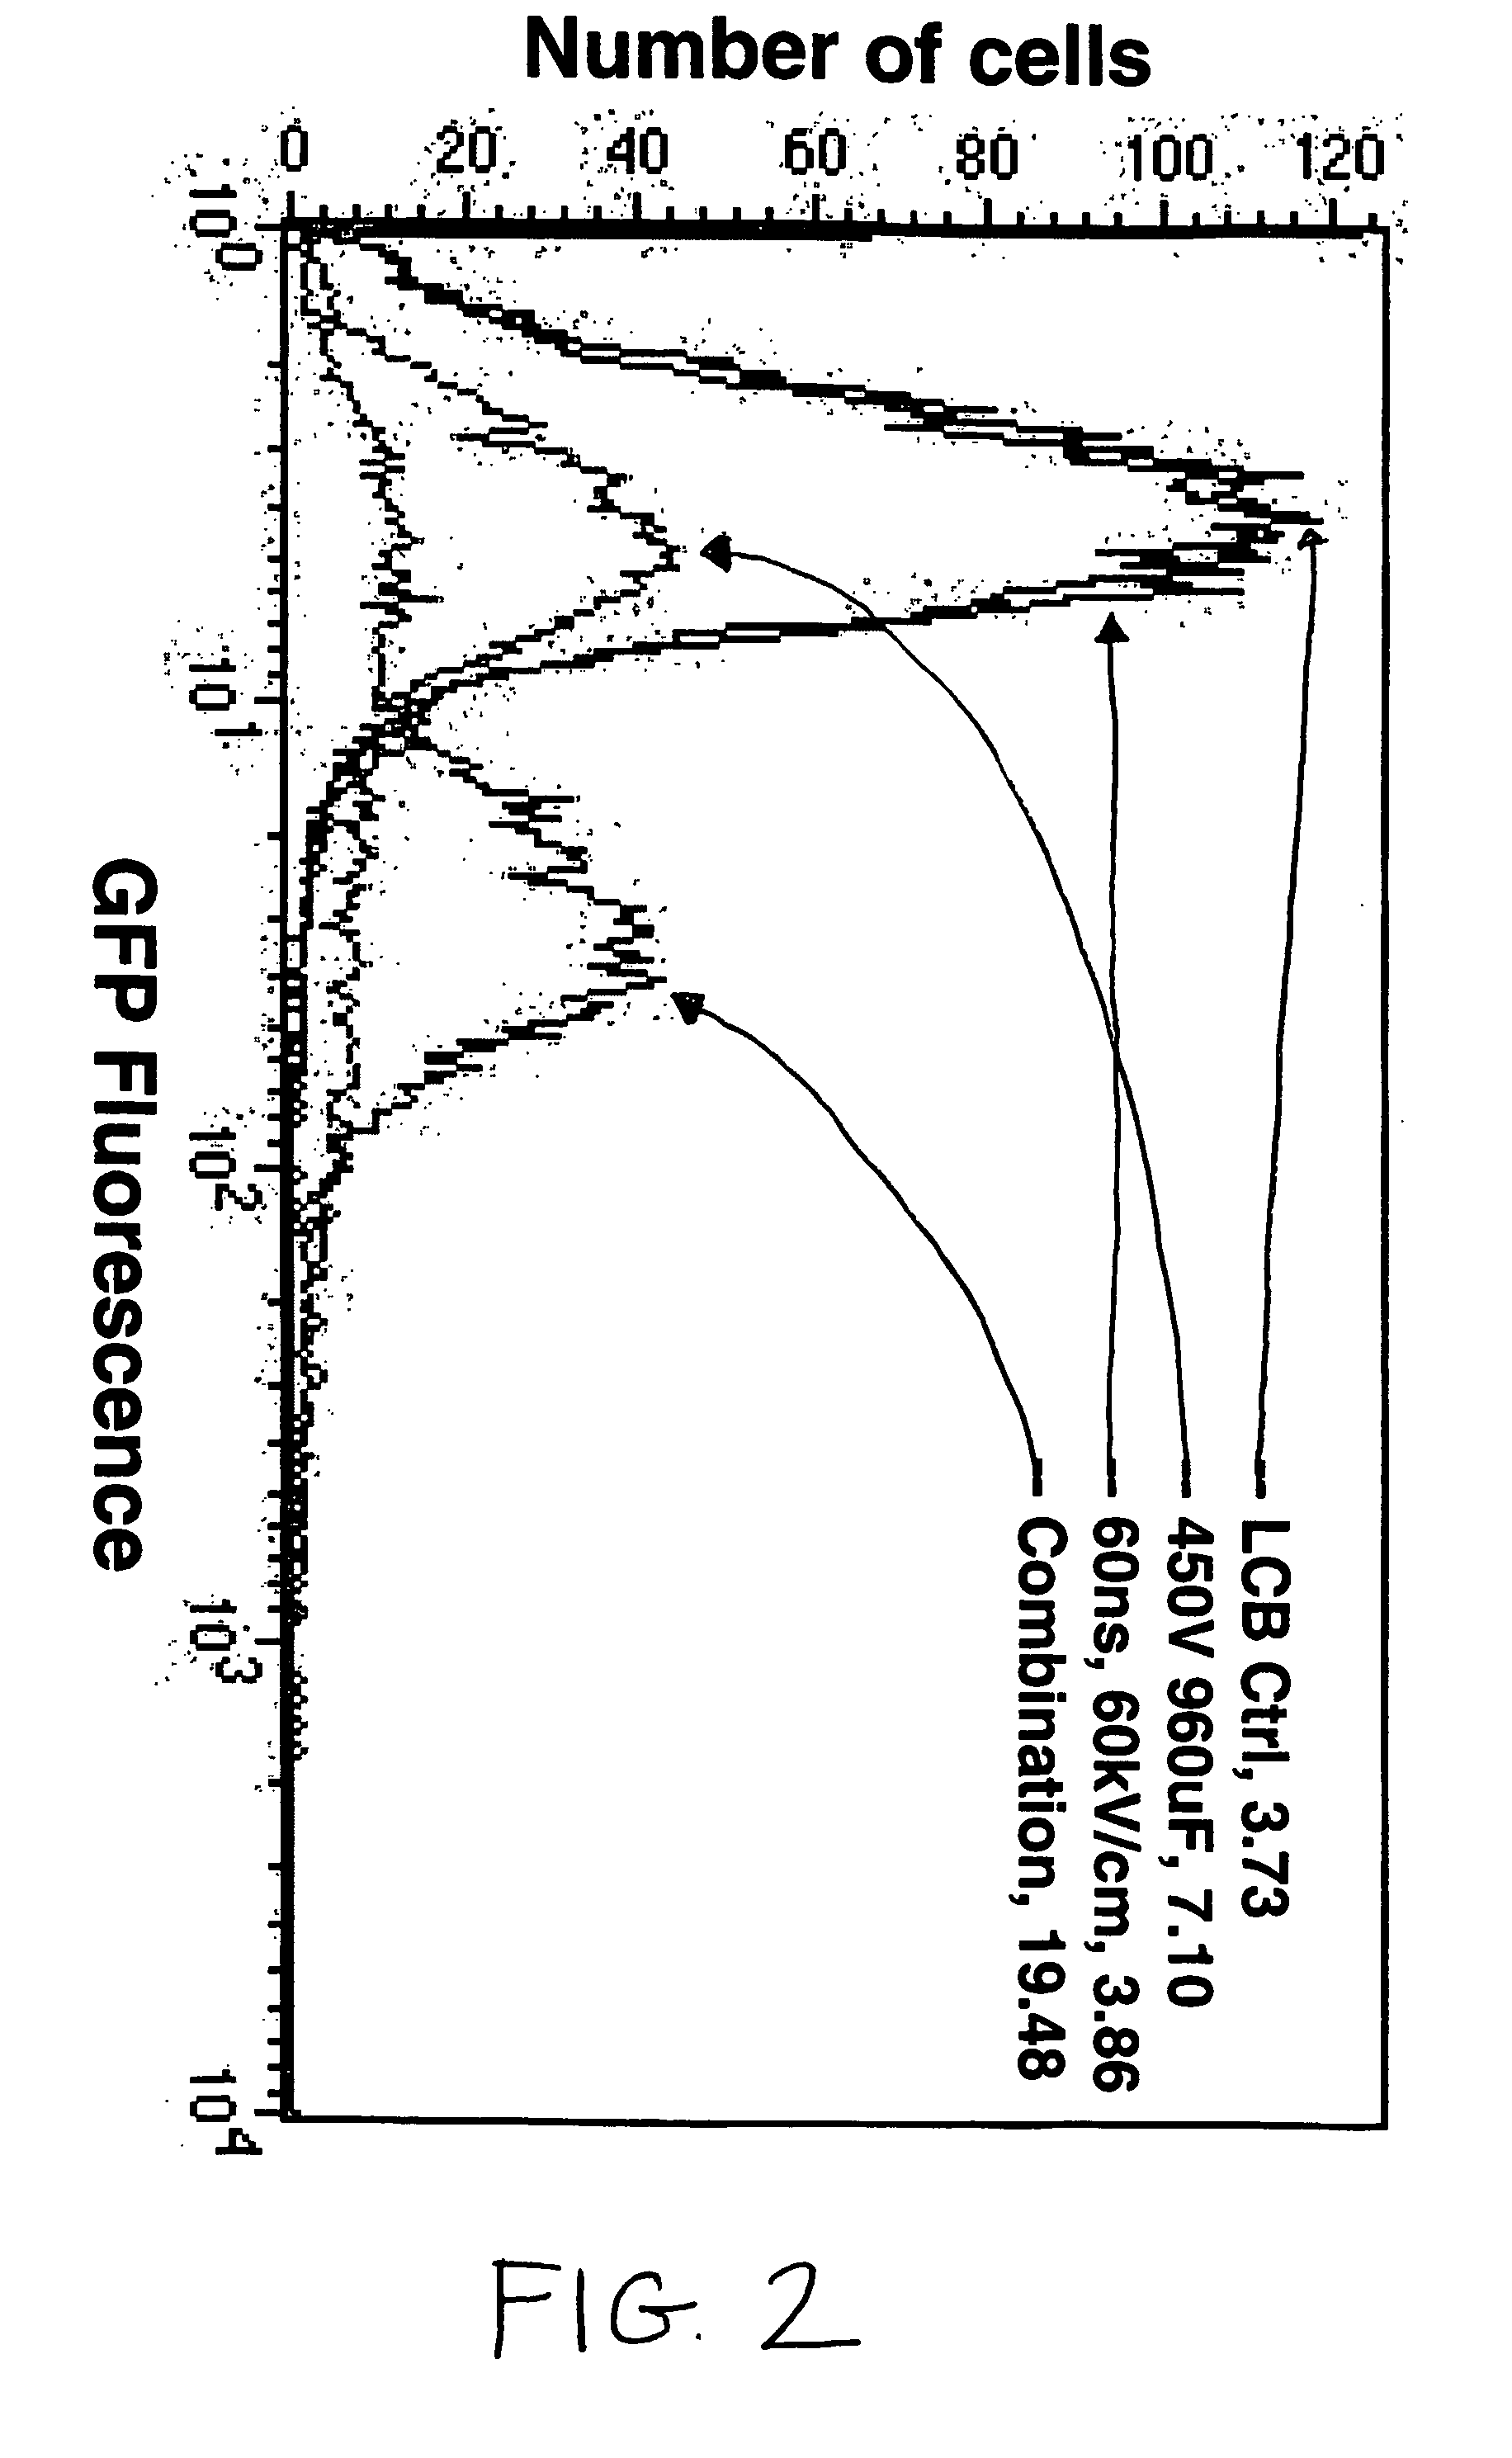 Apparatus for generating electrical pulses and methods of using the same